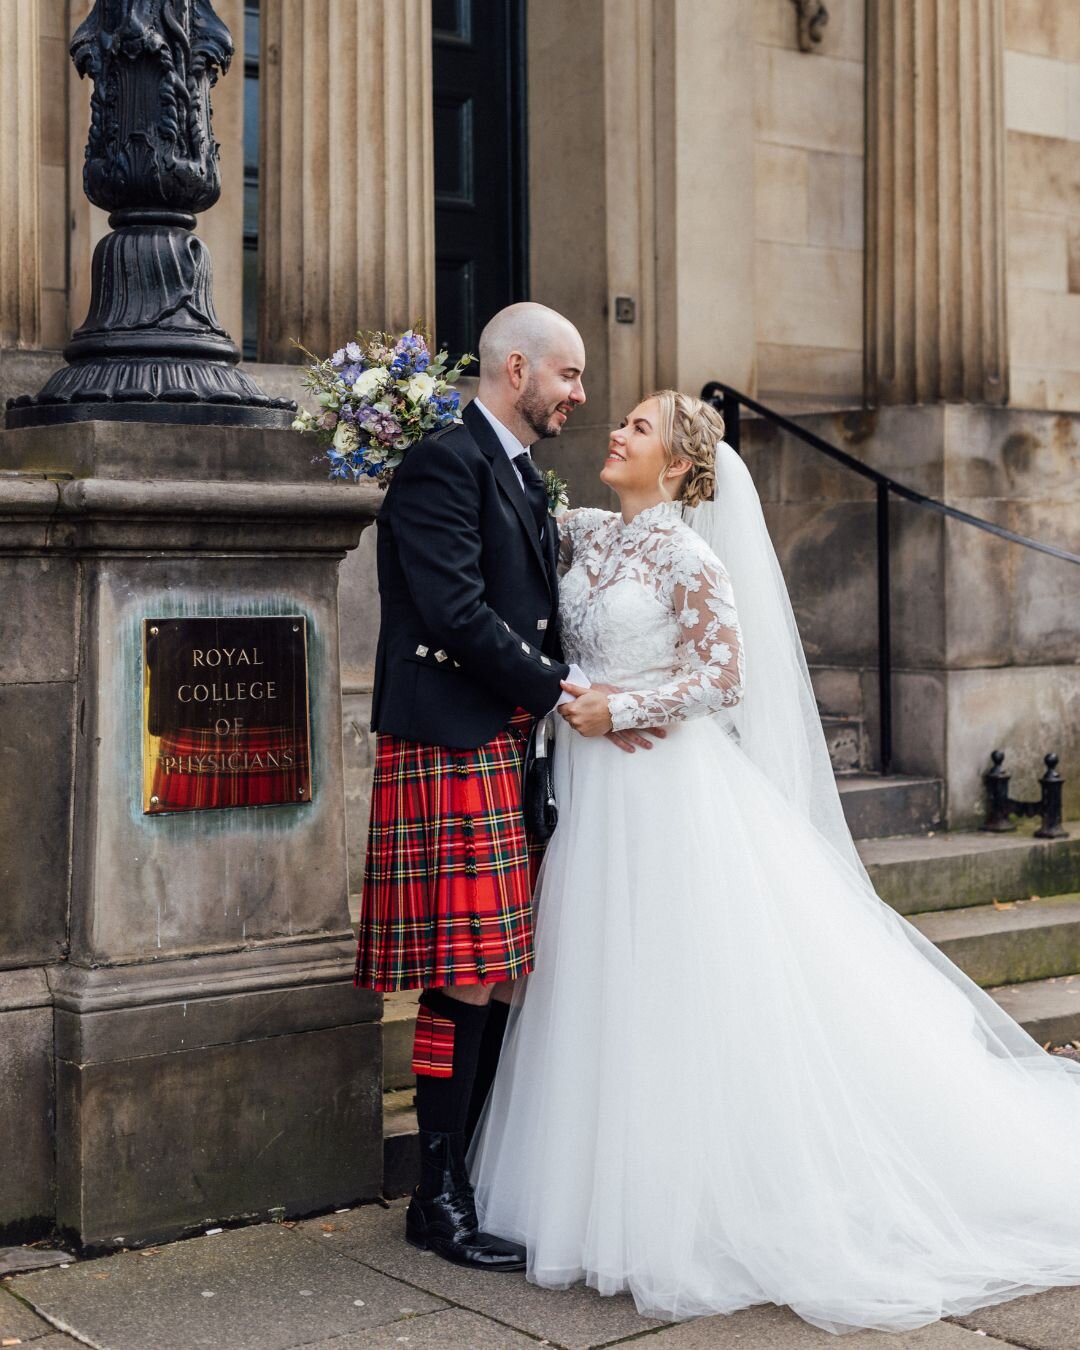 Excited to share more from Trine Mia and Mark's dreamy, elegant Edinburgh wedding in September. Everything about this day was perfection. 

Wonderful team of suppliers:
Venue: @rcpevenue
Florist: @stockbridgeflowercompany 
Photographer: @sarahdkfulto